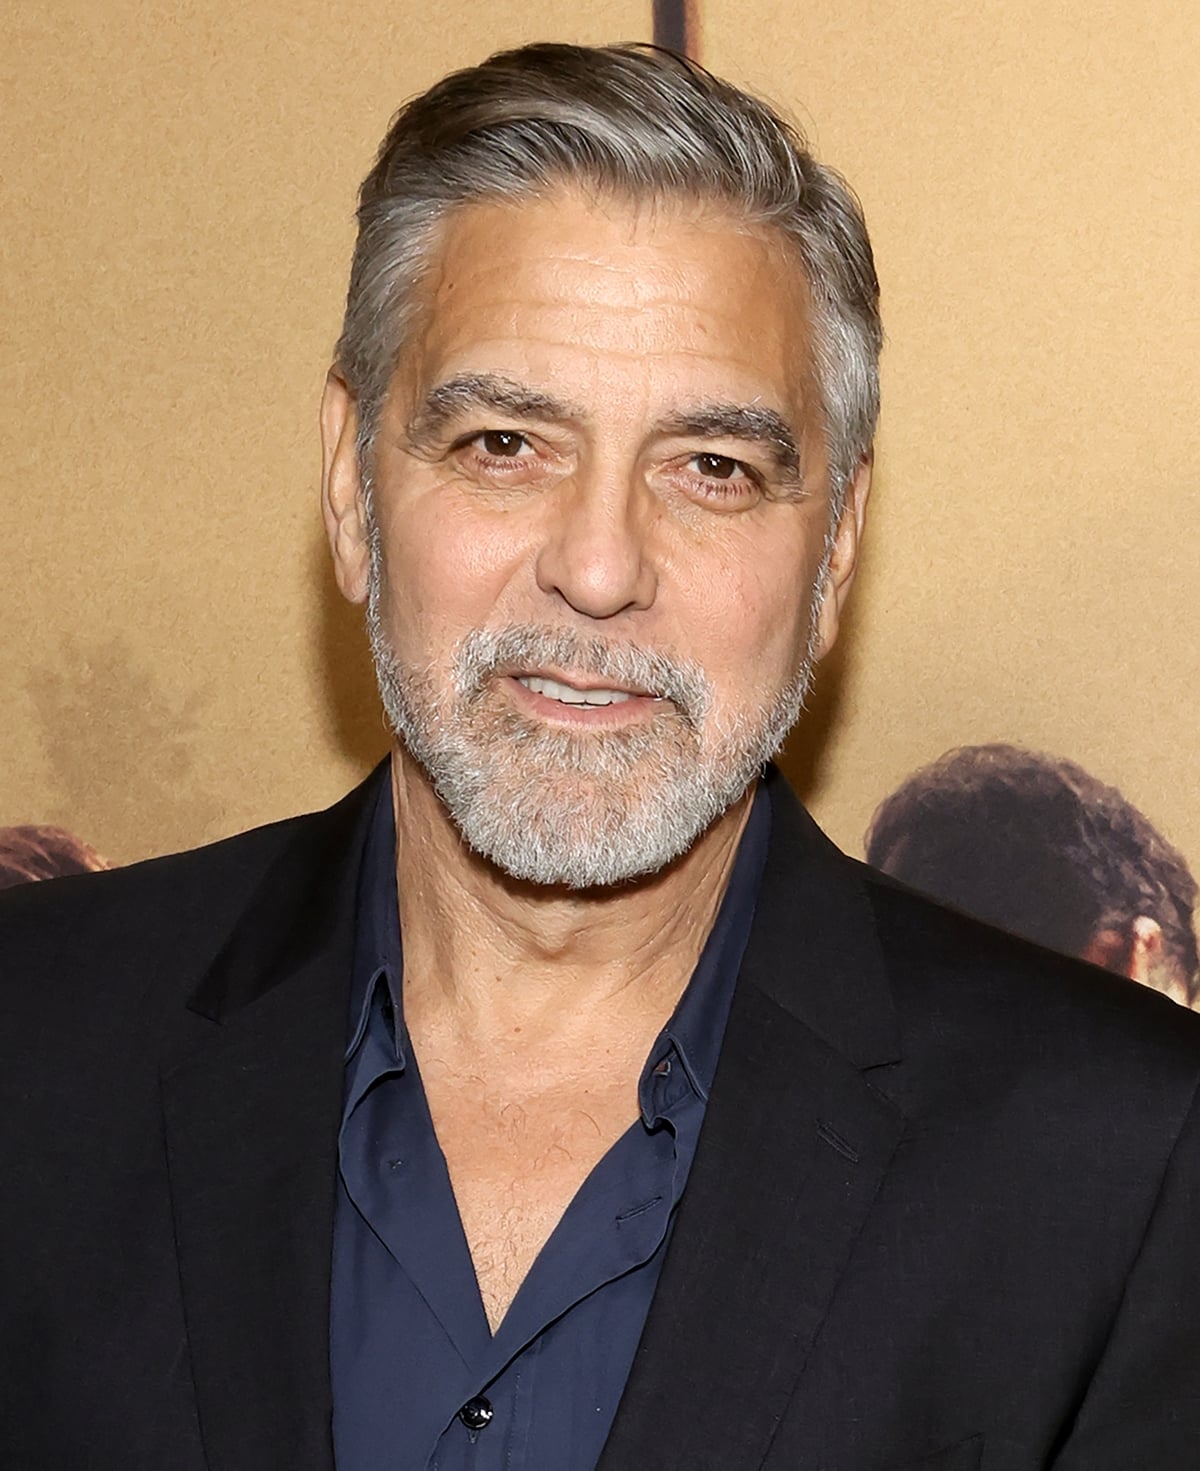 Timeless charm: George Clooney's silver hair and salt-and-pepper beard at the premiere night